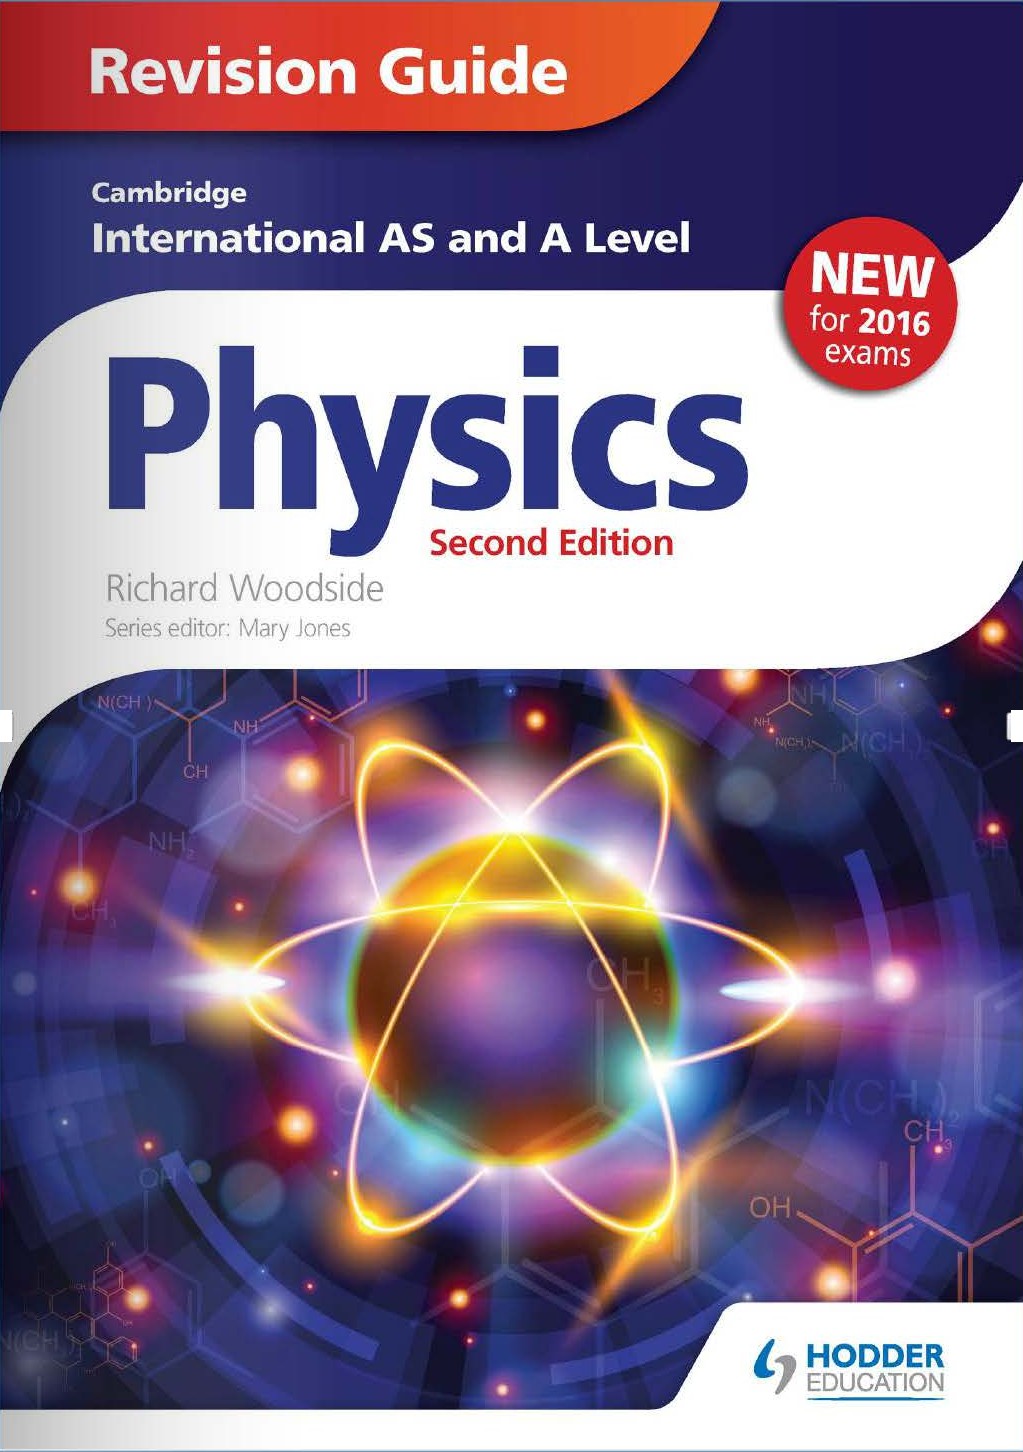 Cambridge International AS A Level Physics Revision Guide 2nd Ed